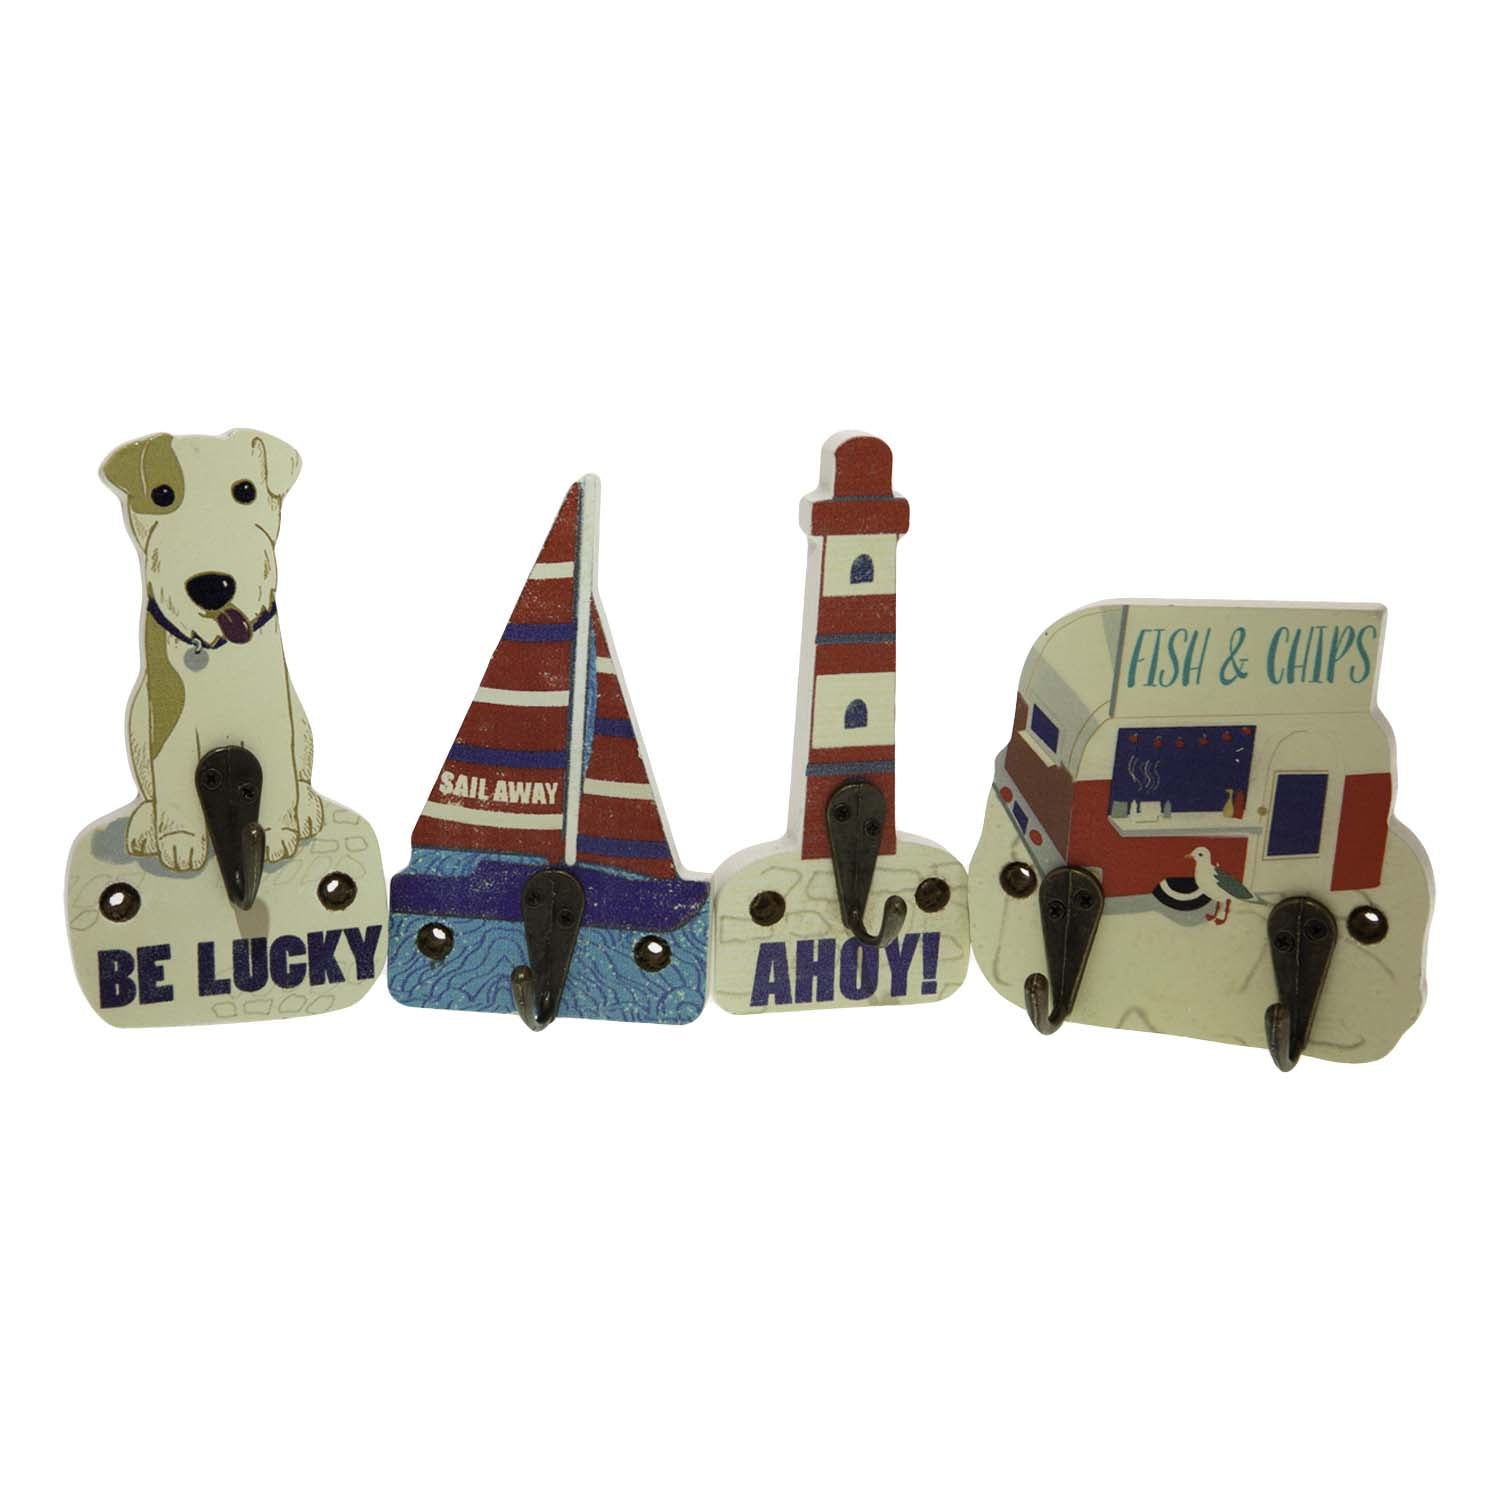 Dog Lover Gifts available at Dog Krazy Gifts – Jill White Rocket68 Ahoy Hooks Set of 4 available at www.dogkrazygifts.co.uk